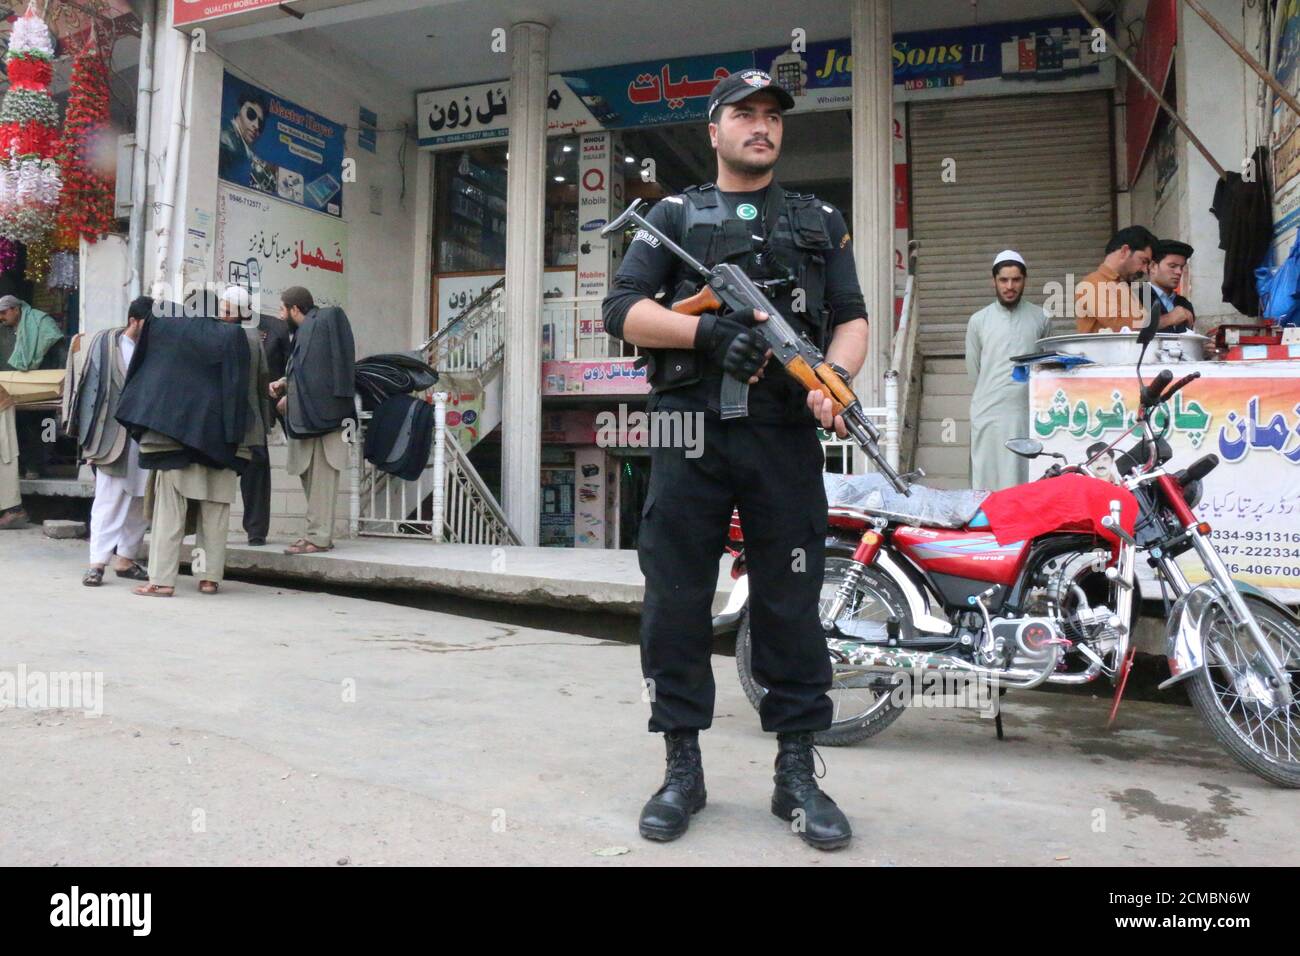 A policeman stands guard at a market in Mingora, in Swat Valley, Pakistan December 7, 2016. Picture taken December 7, 2016. REUTERS/Hazrat Ali Bacha Stock Photo